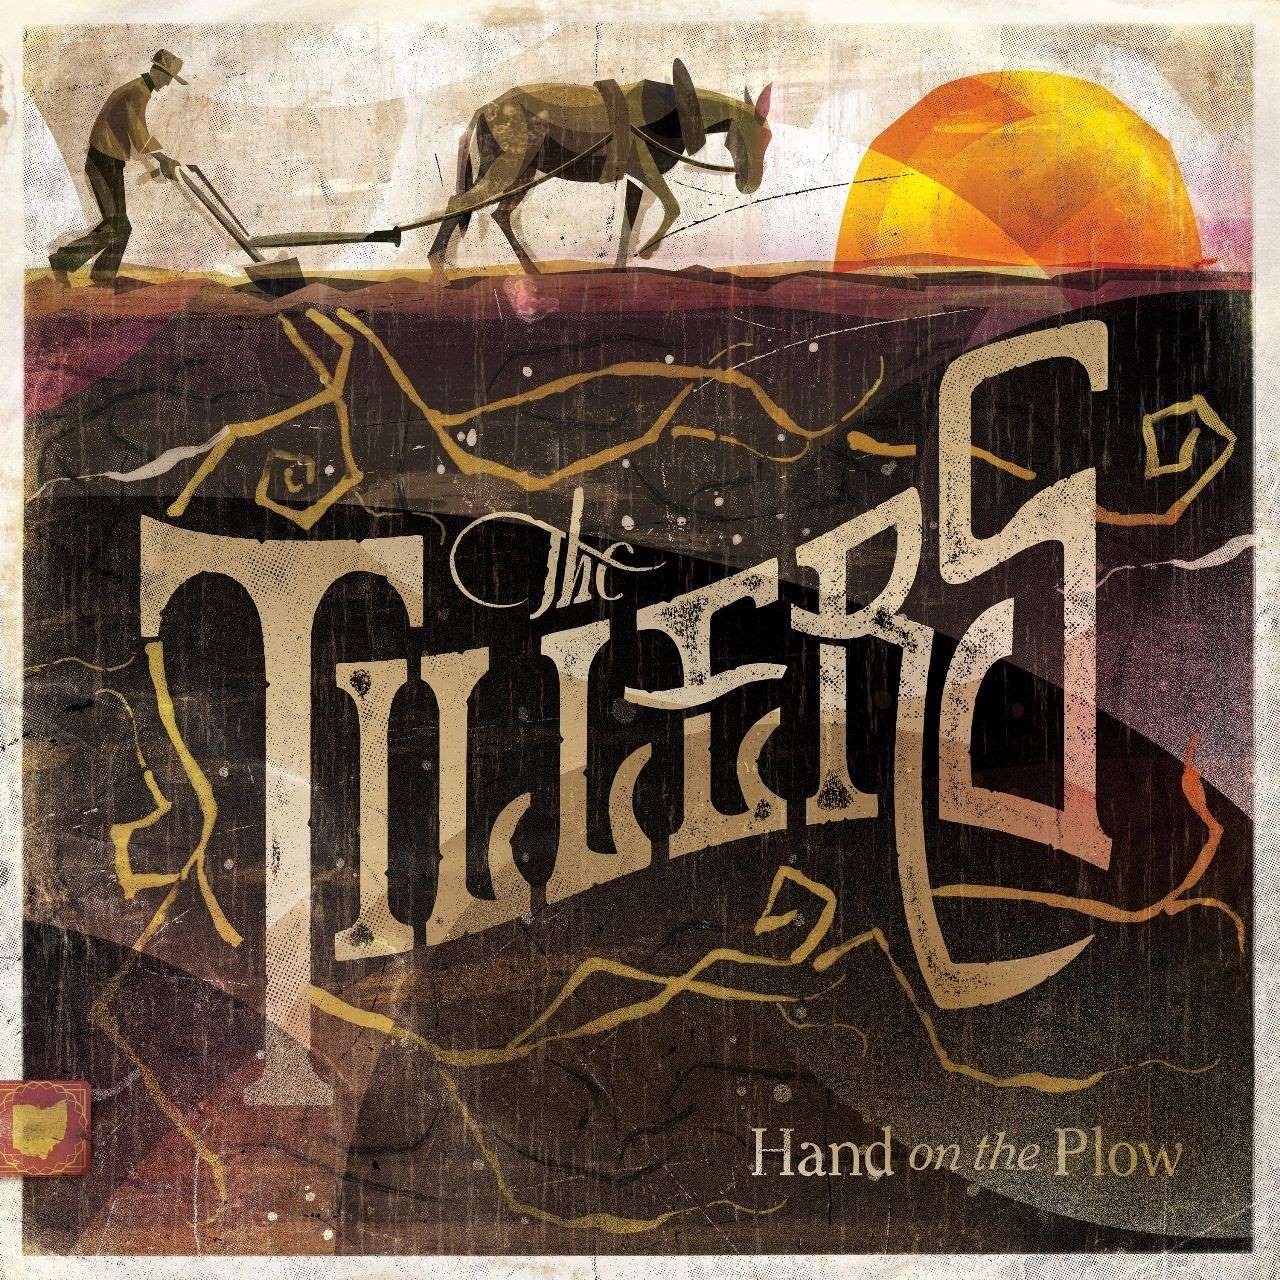 Tillers - Hand On The Plow cover album